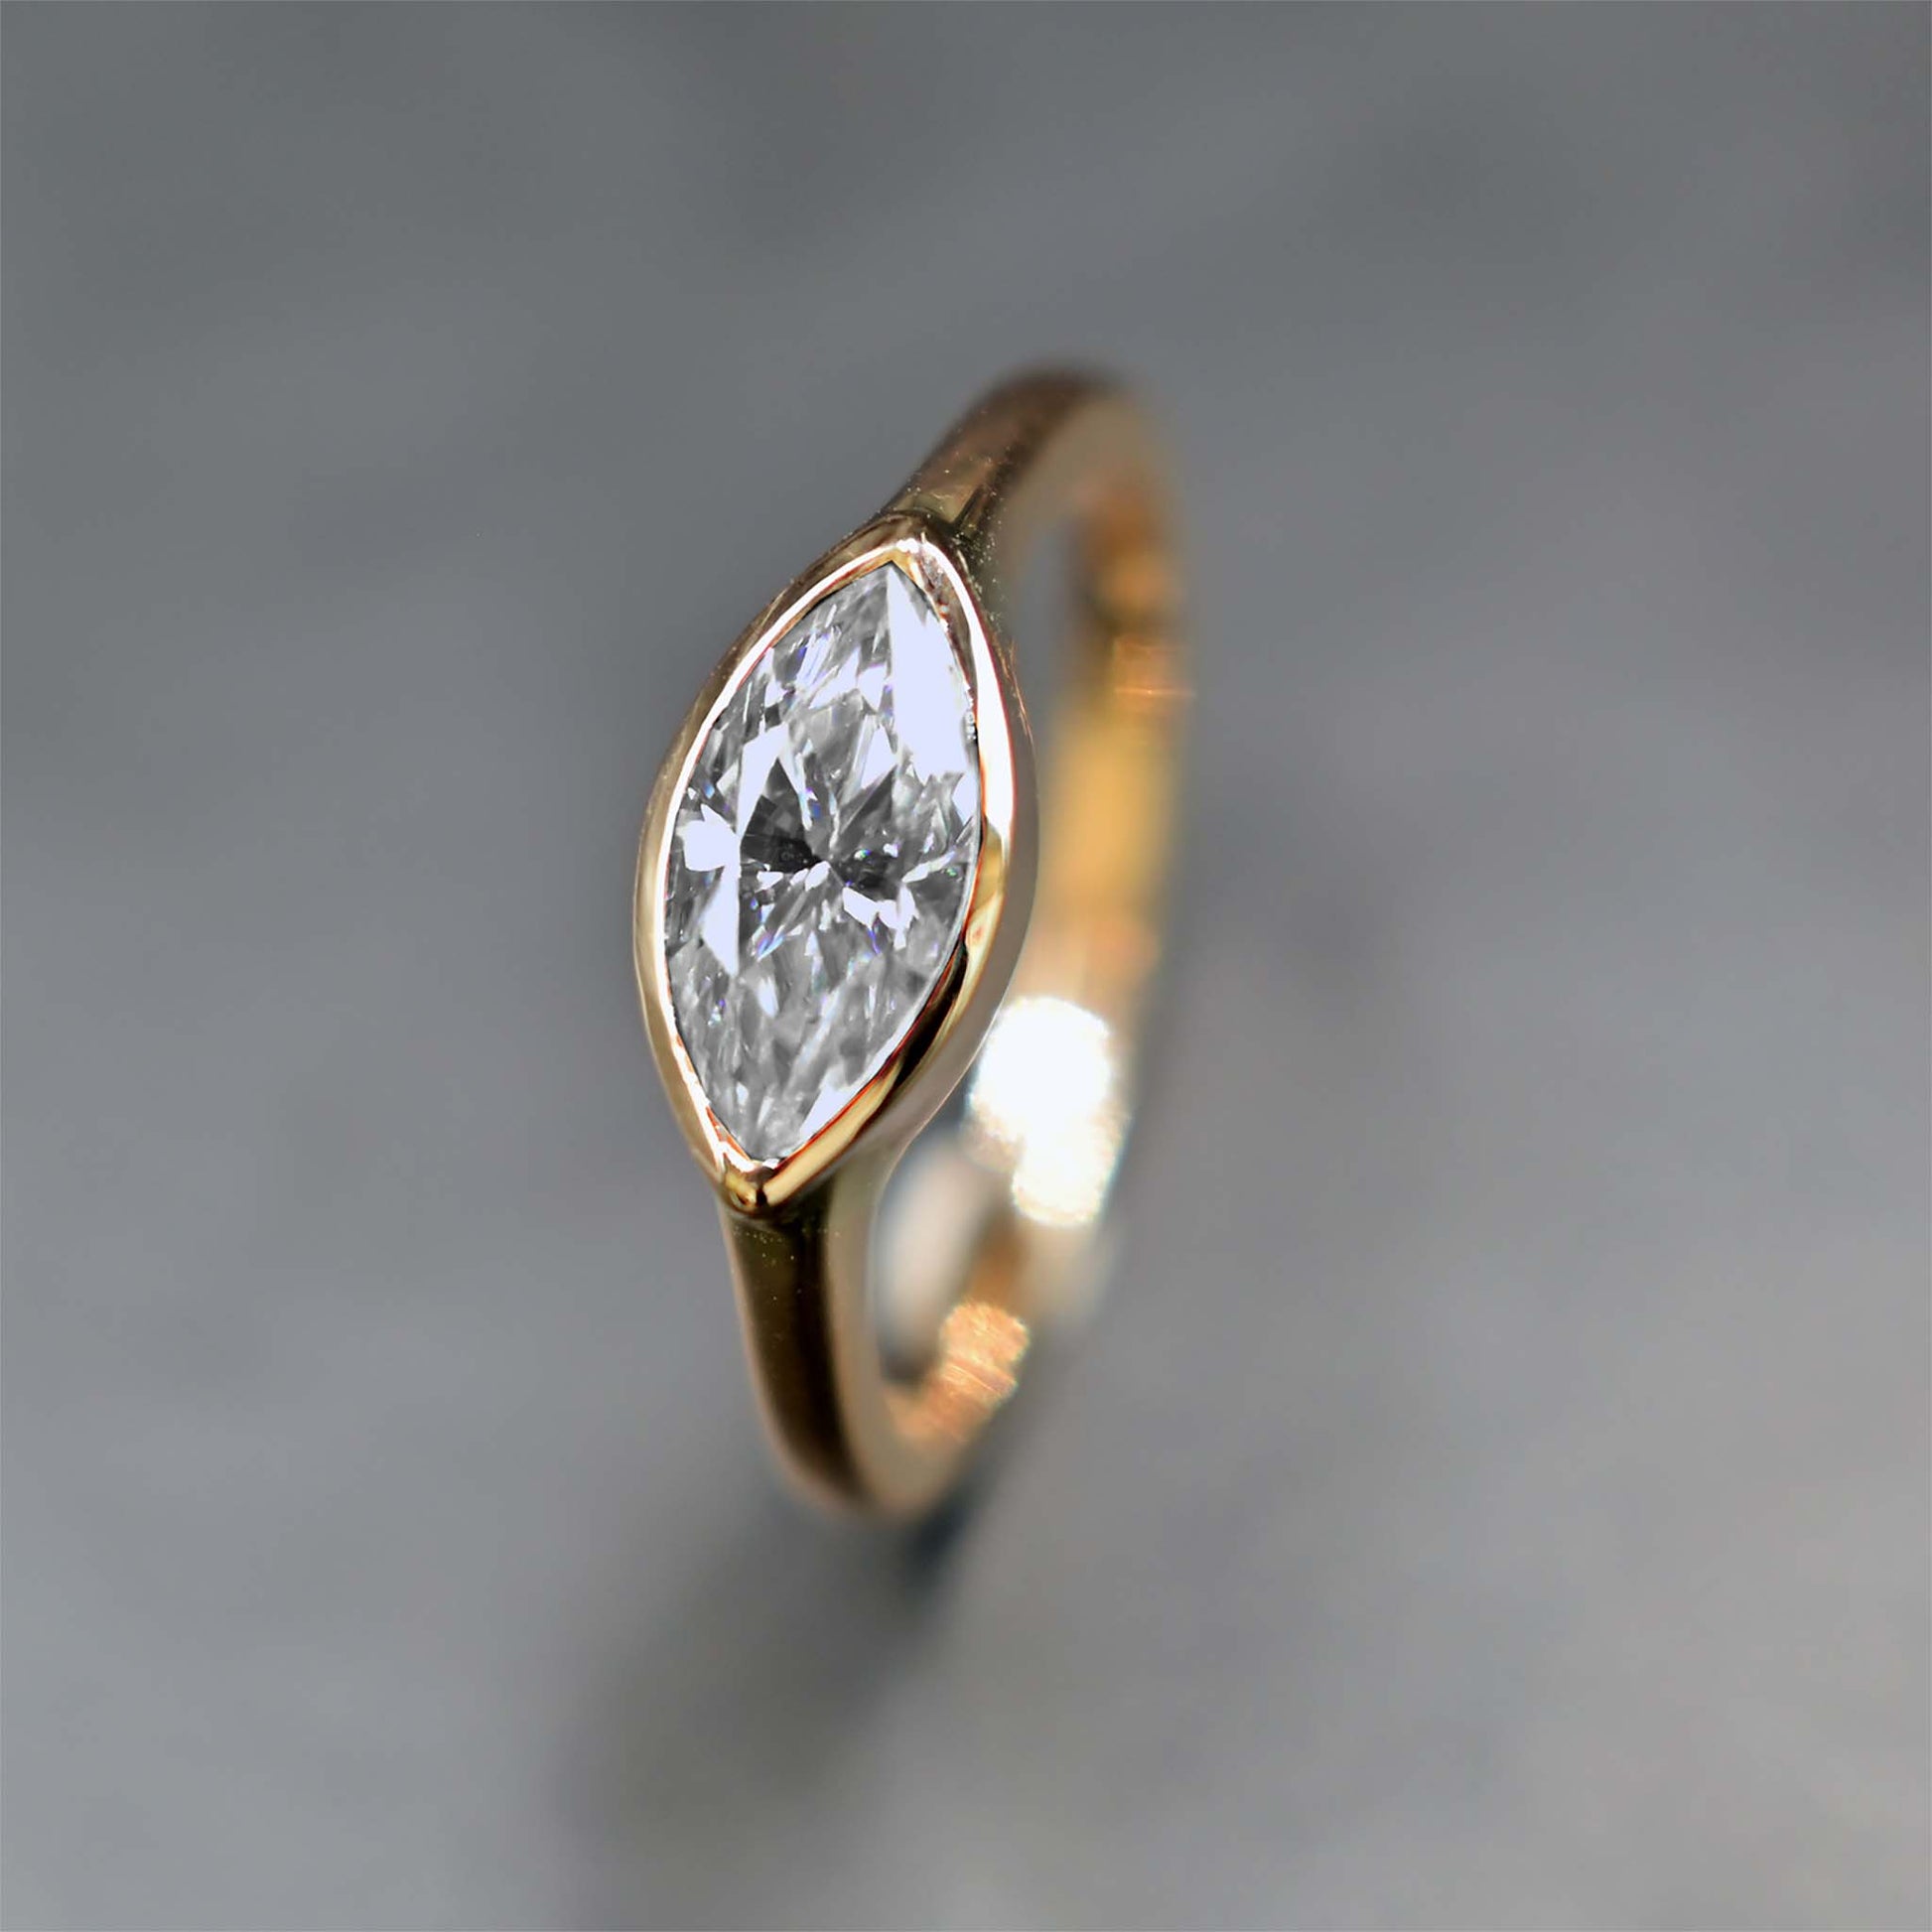 Stunning marquise ring made by Shiraz Jewelry in Chiang Mai, Thailand